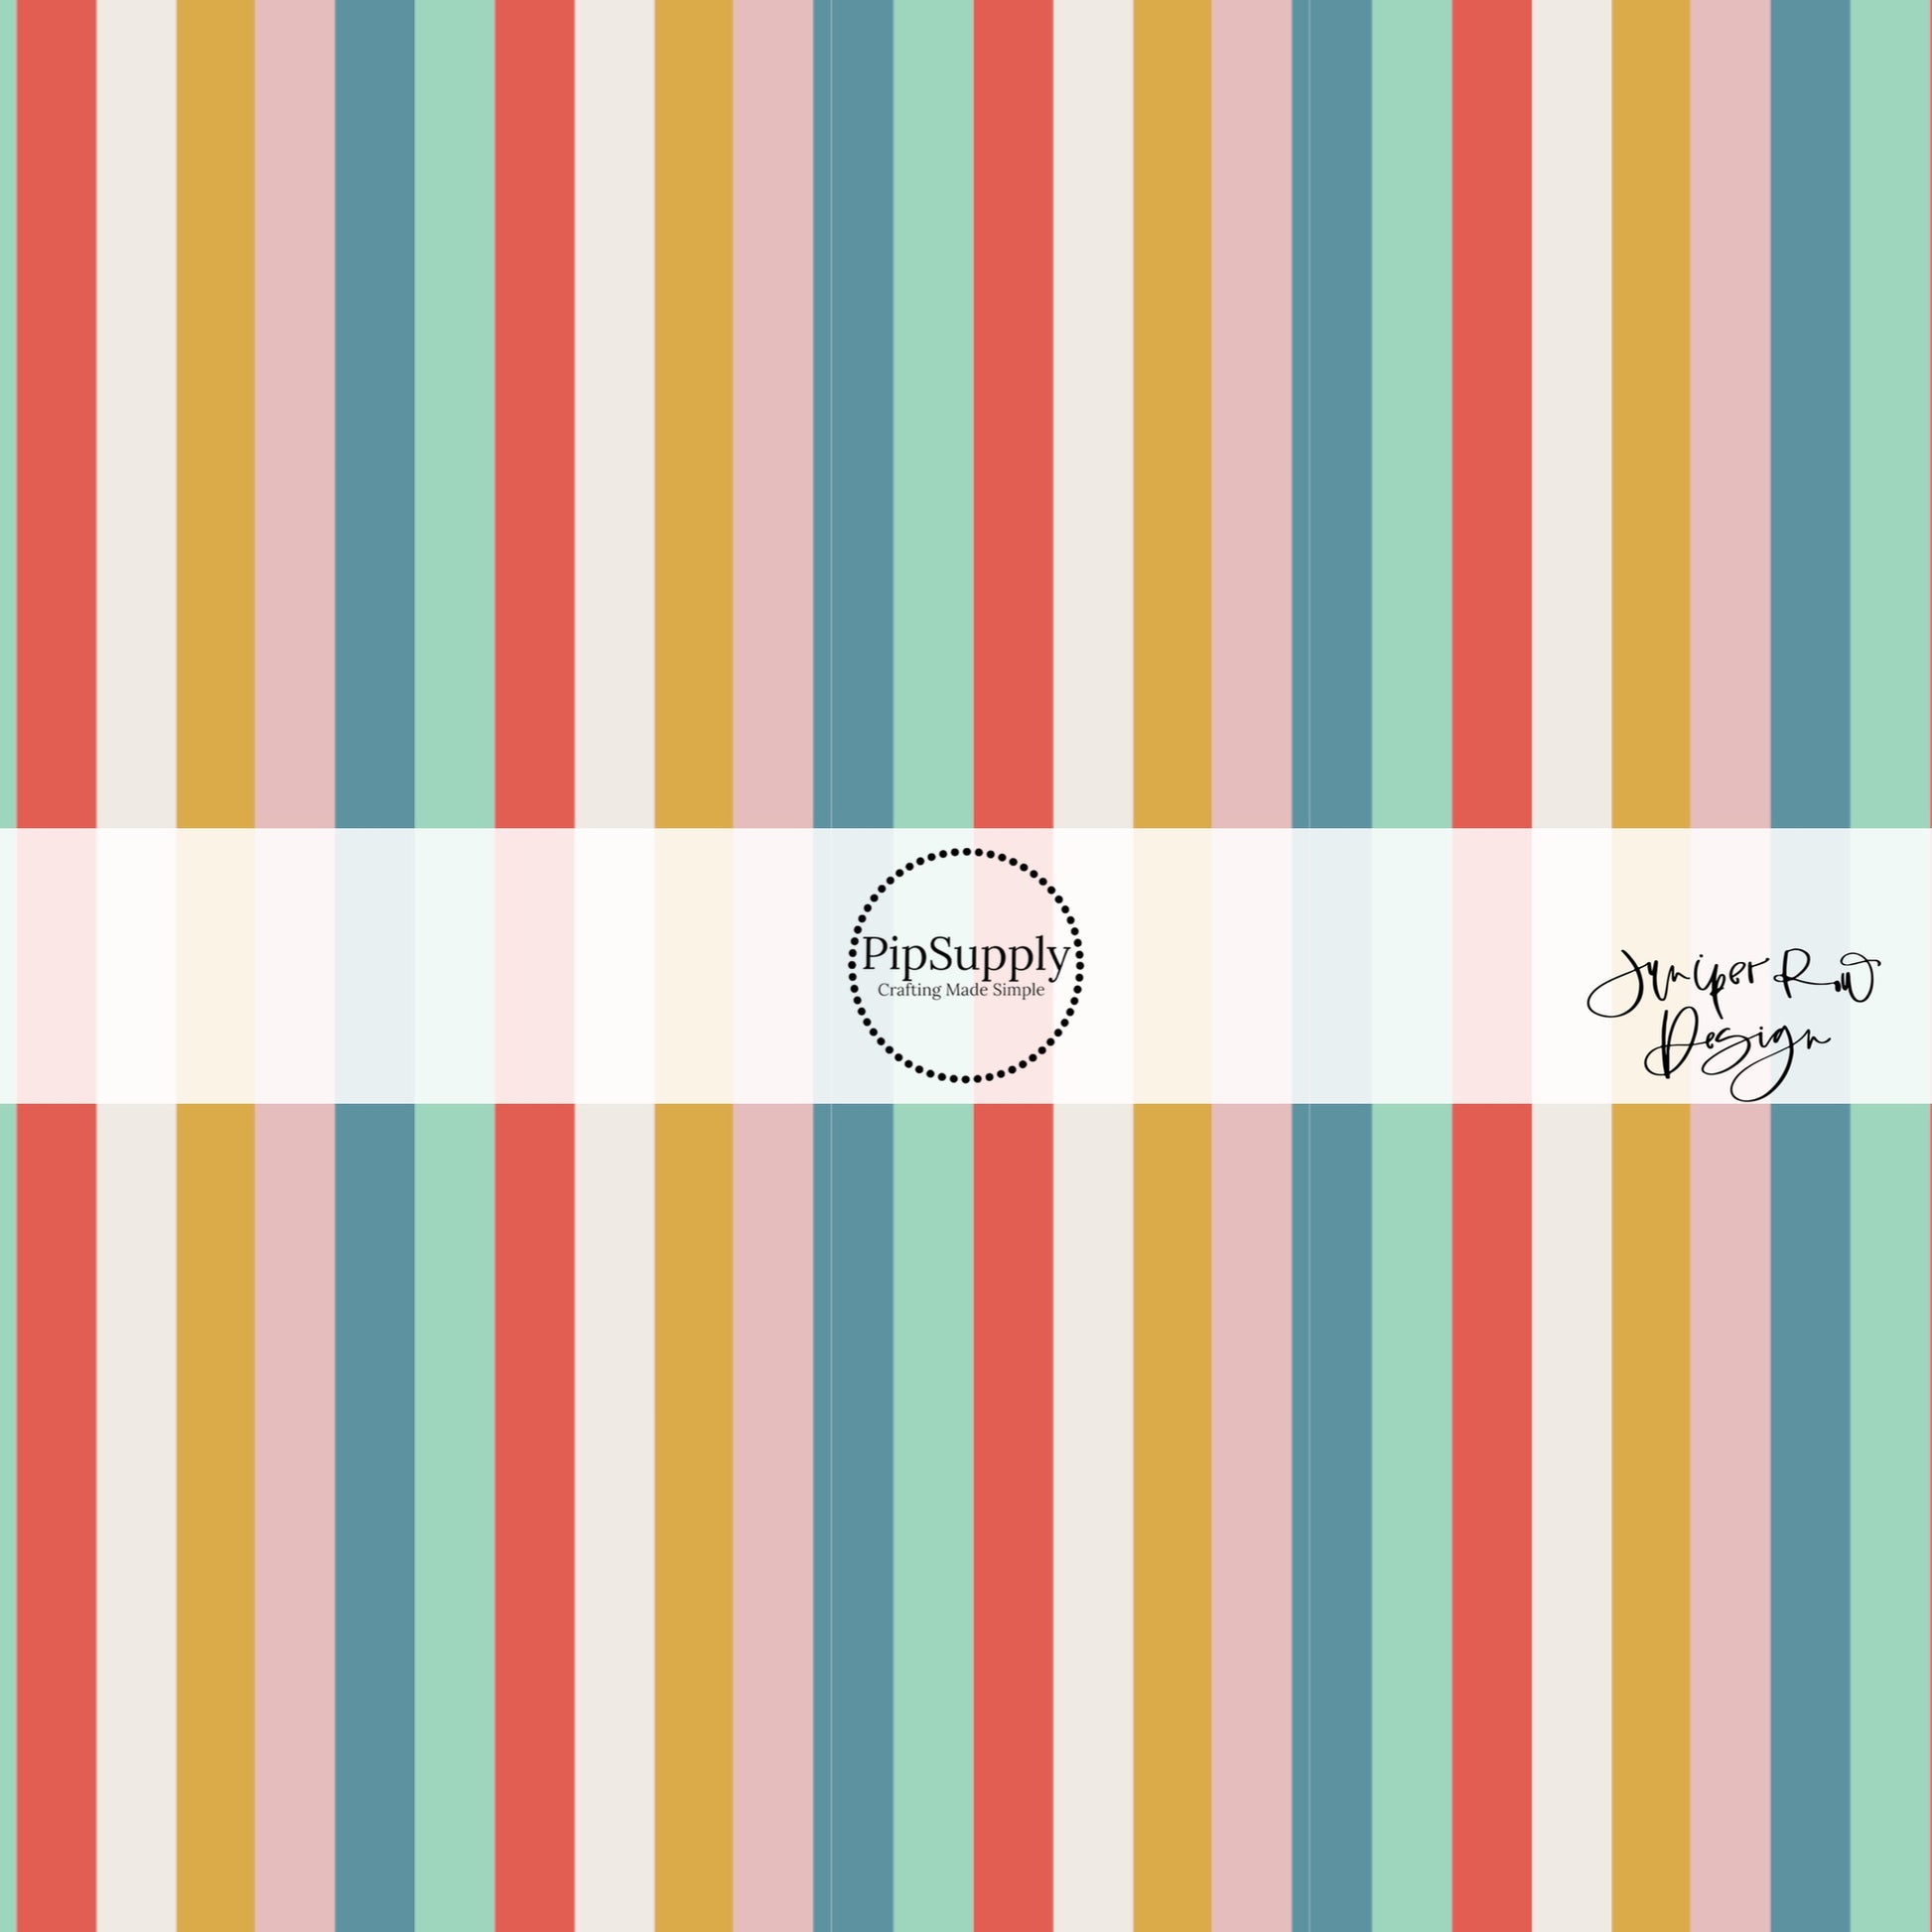 Red, white, yellow, pink, and blue vertical striped fabric by the yard.